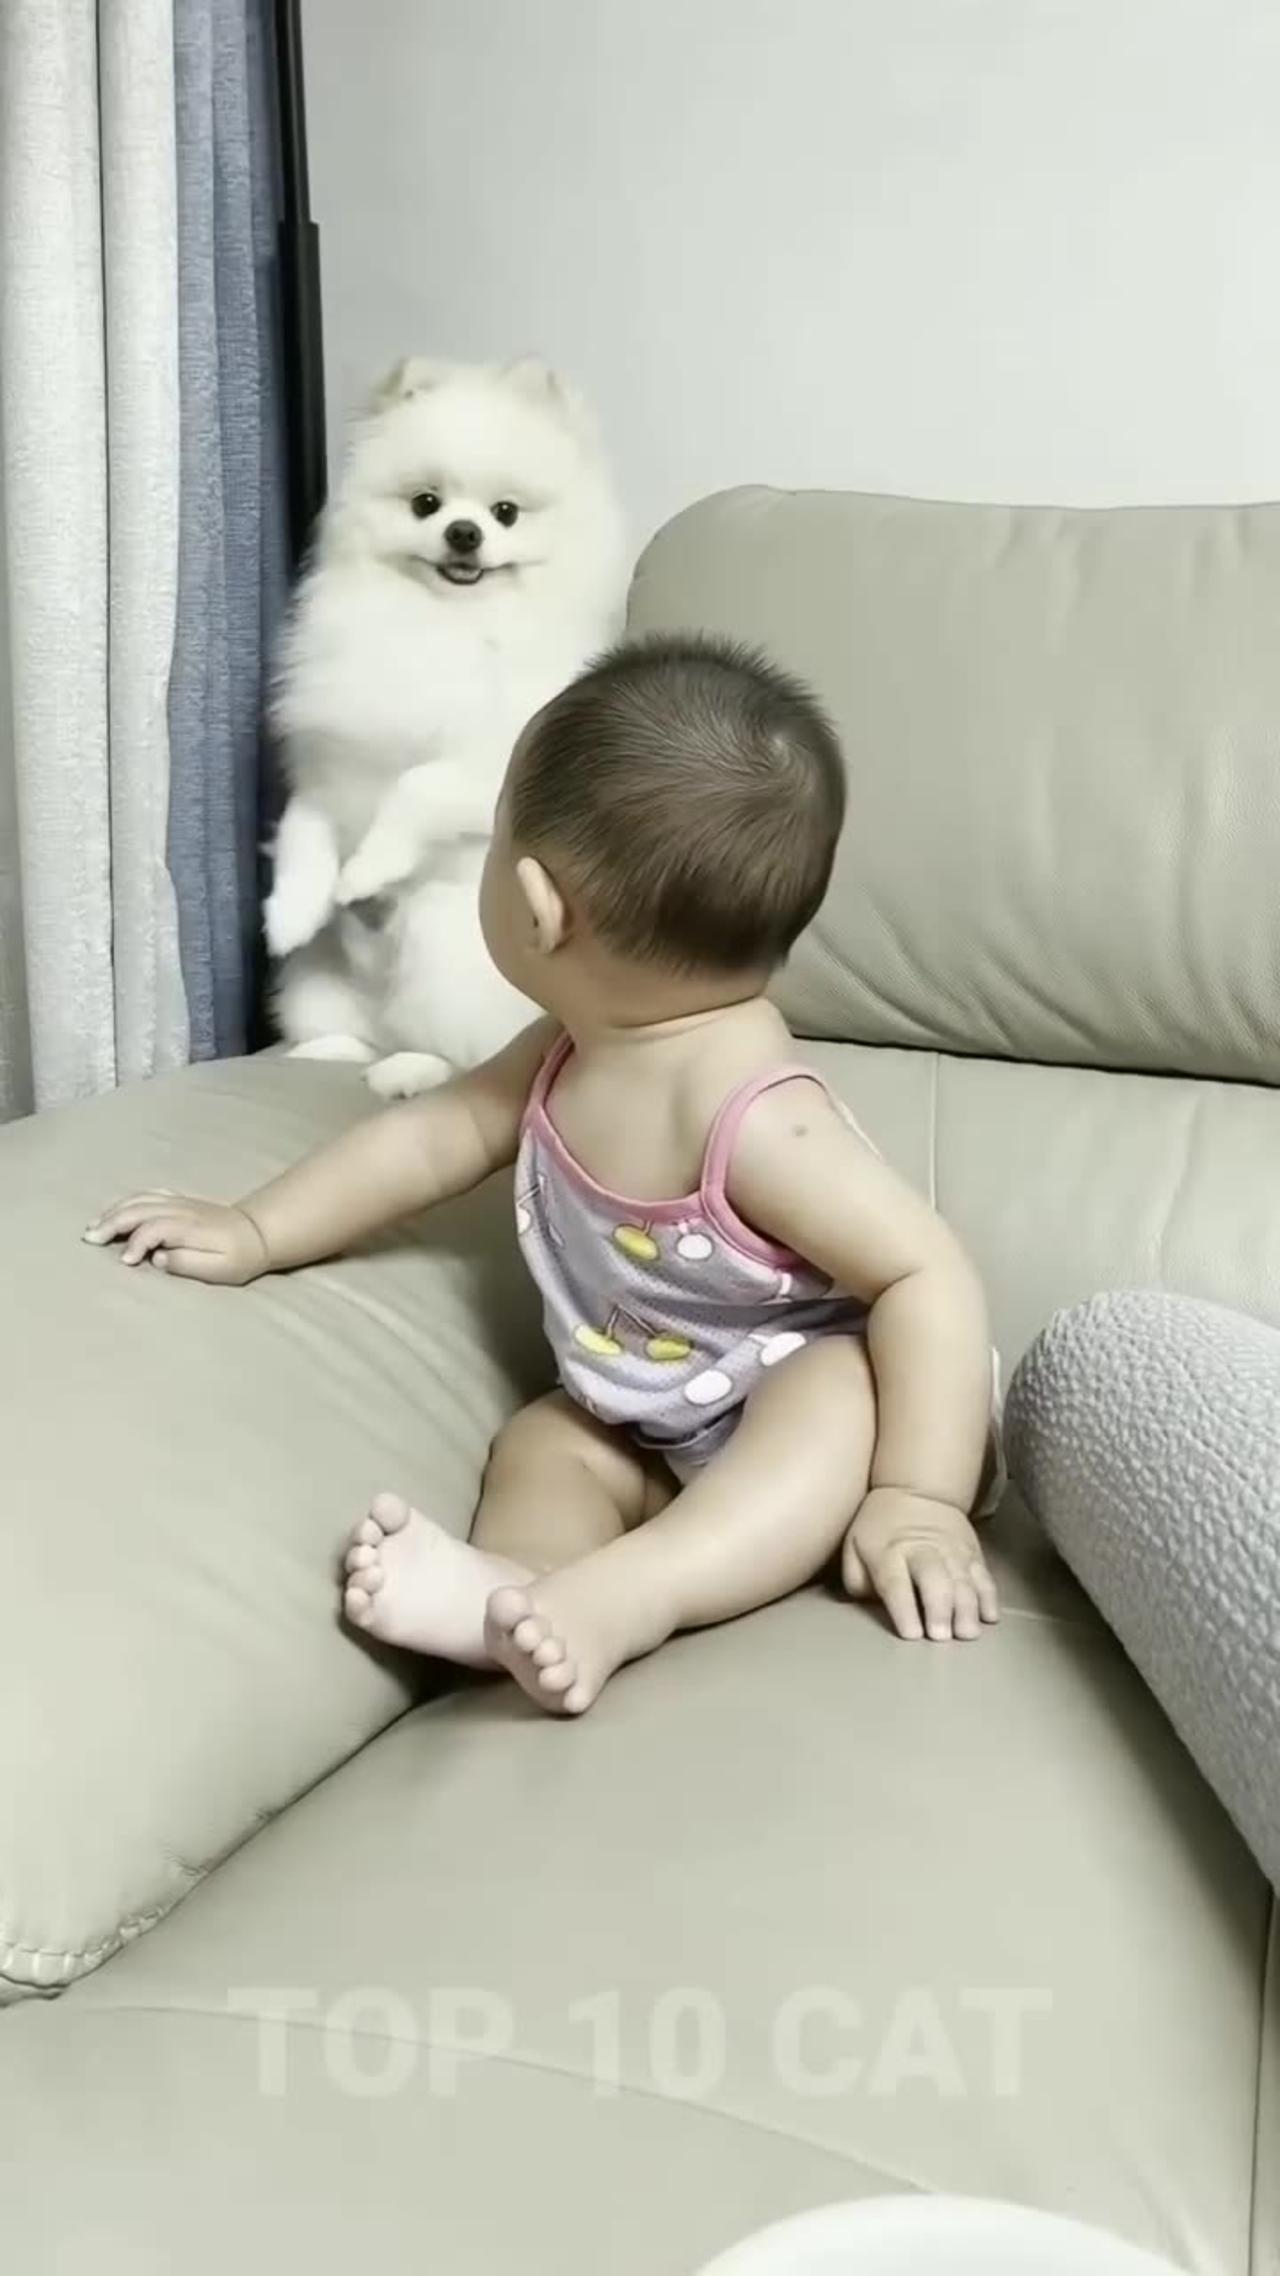 Dog with baby cute 😍 funny video